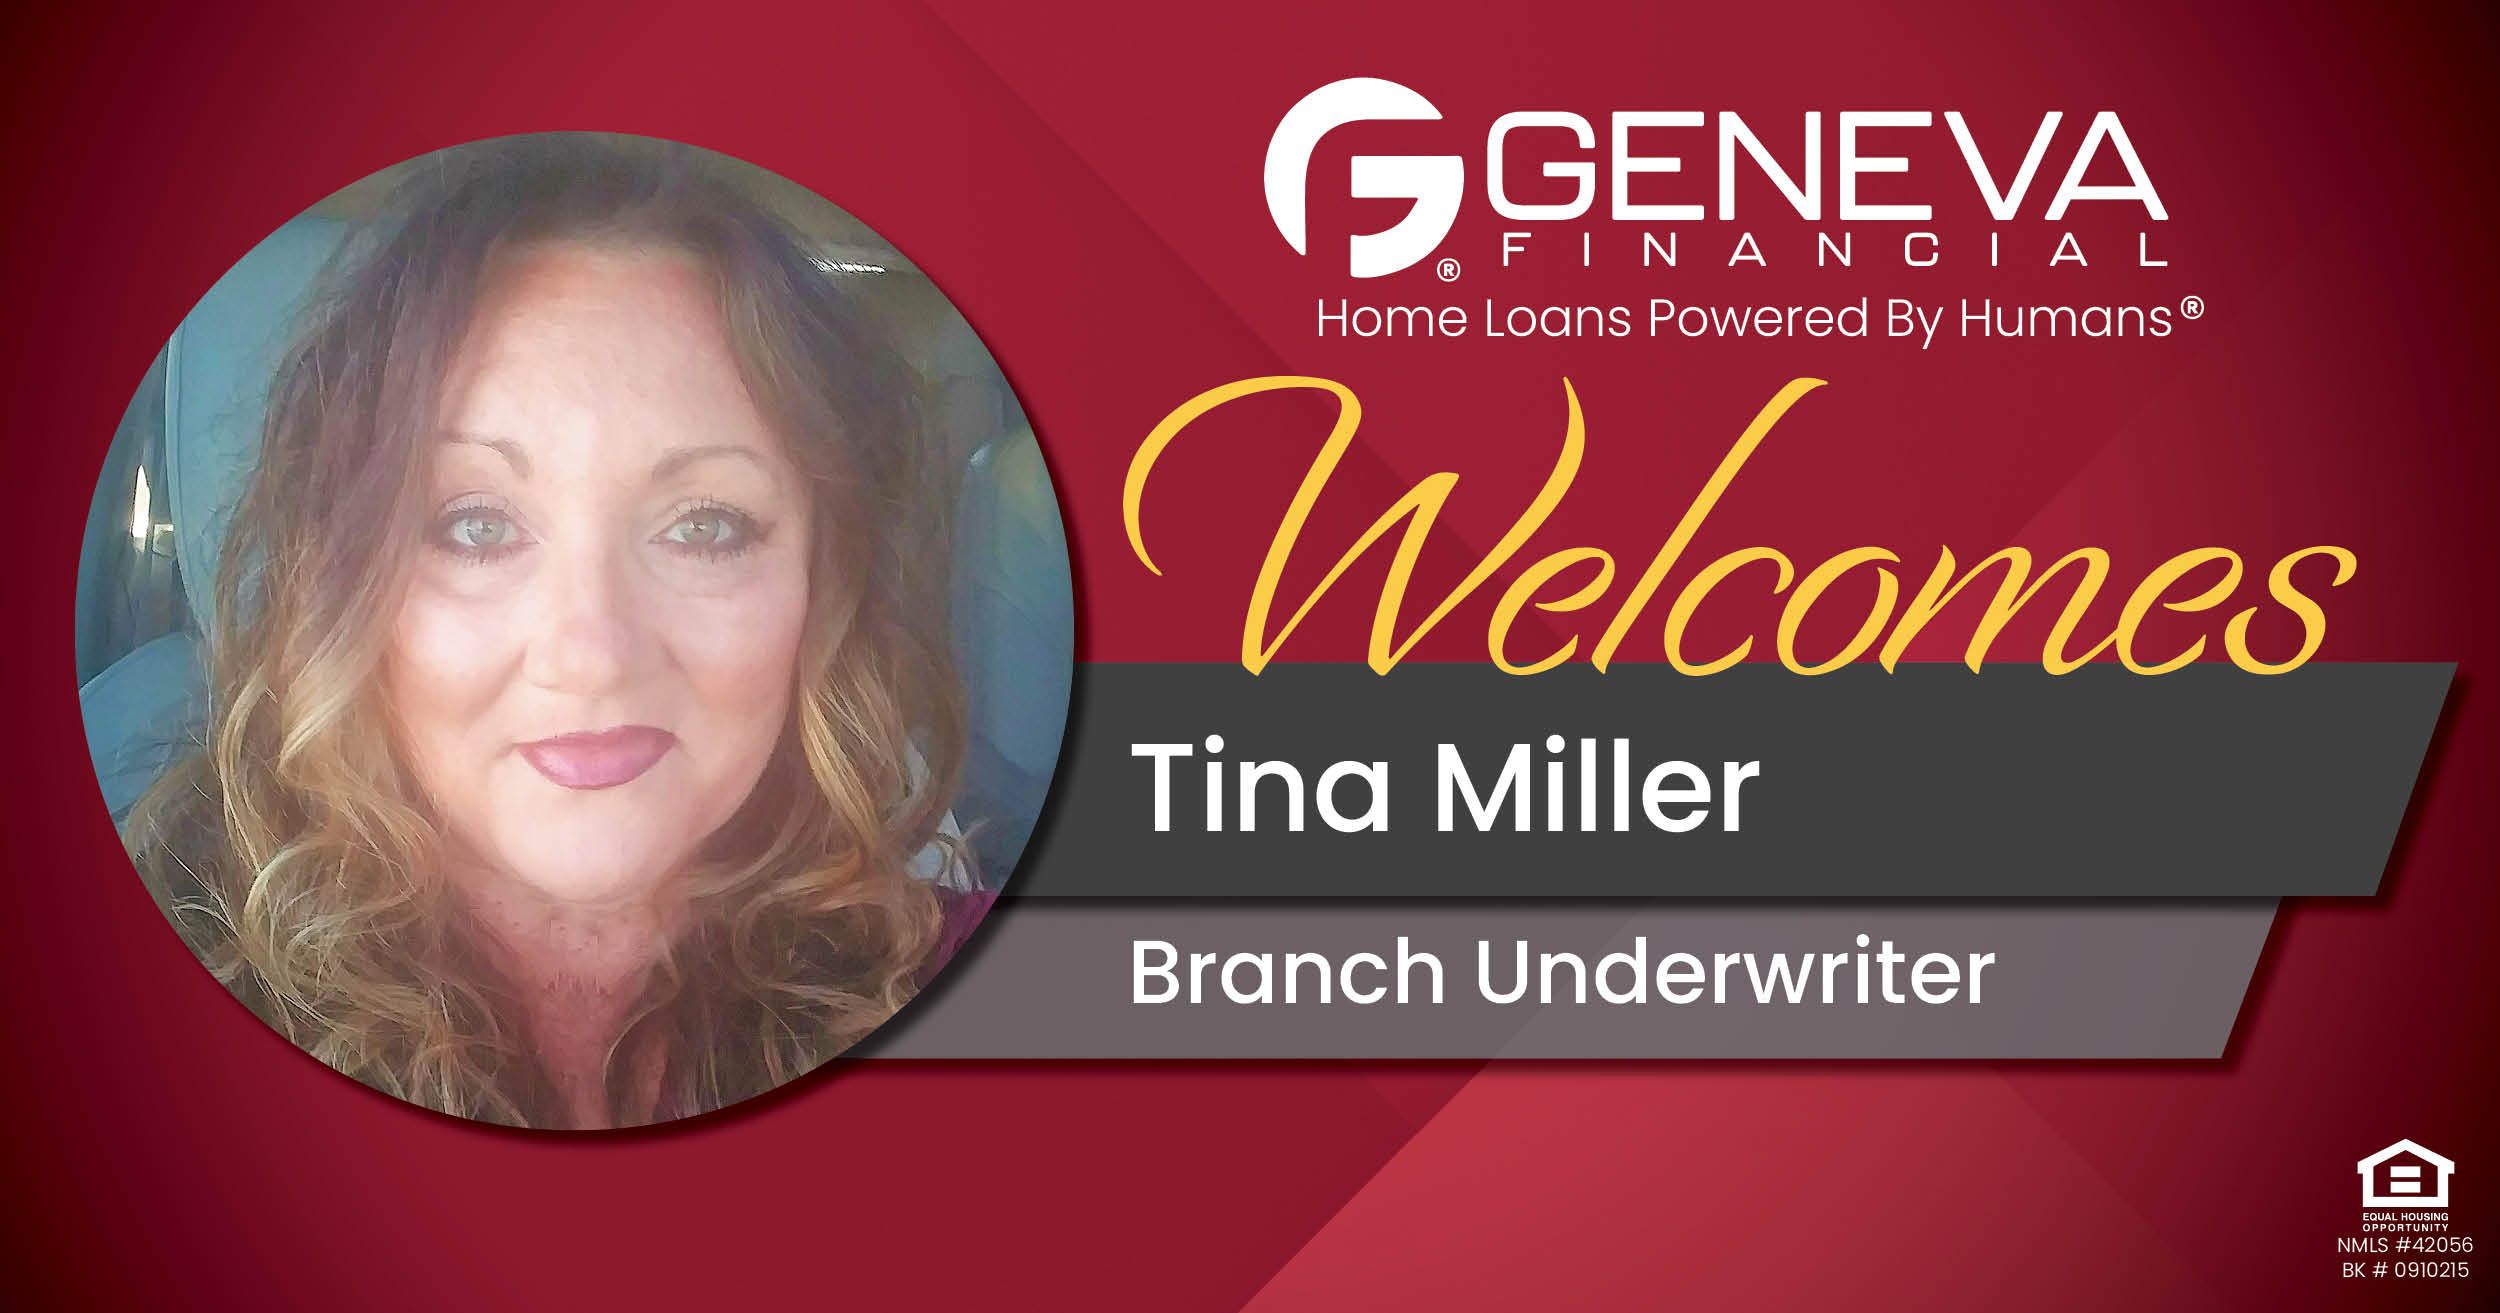 Geneva Financial Welcomes New Underwriter Tina Miller to Chesterfield, Missouri – Home Loans Powered by Humans®.